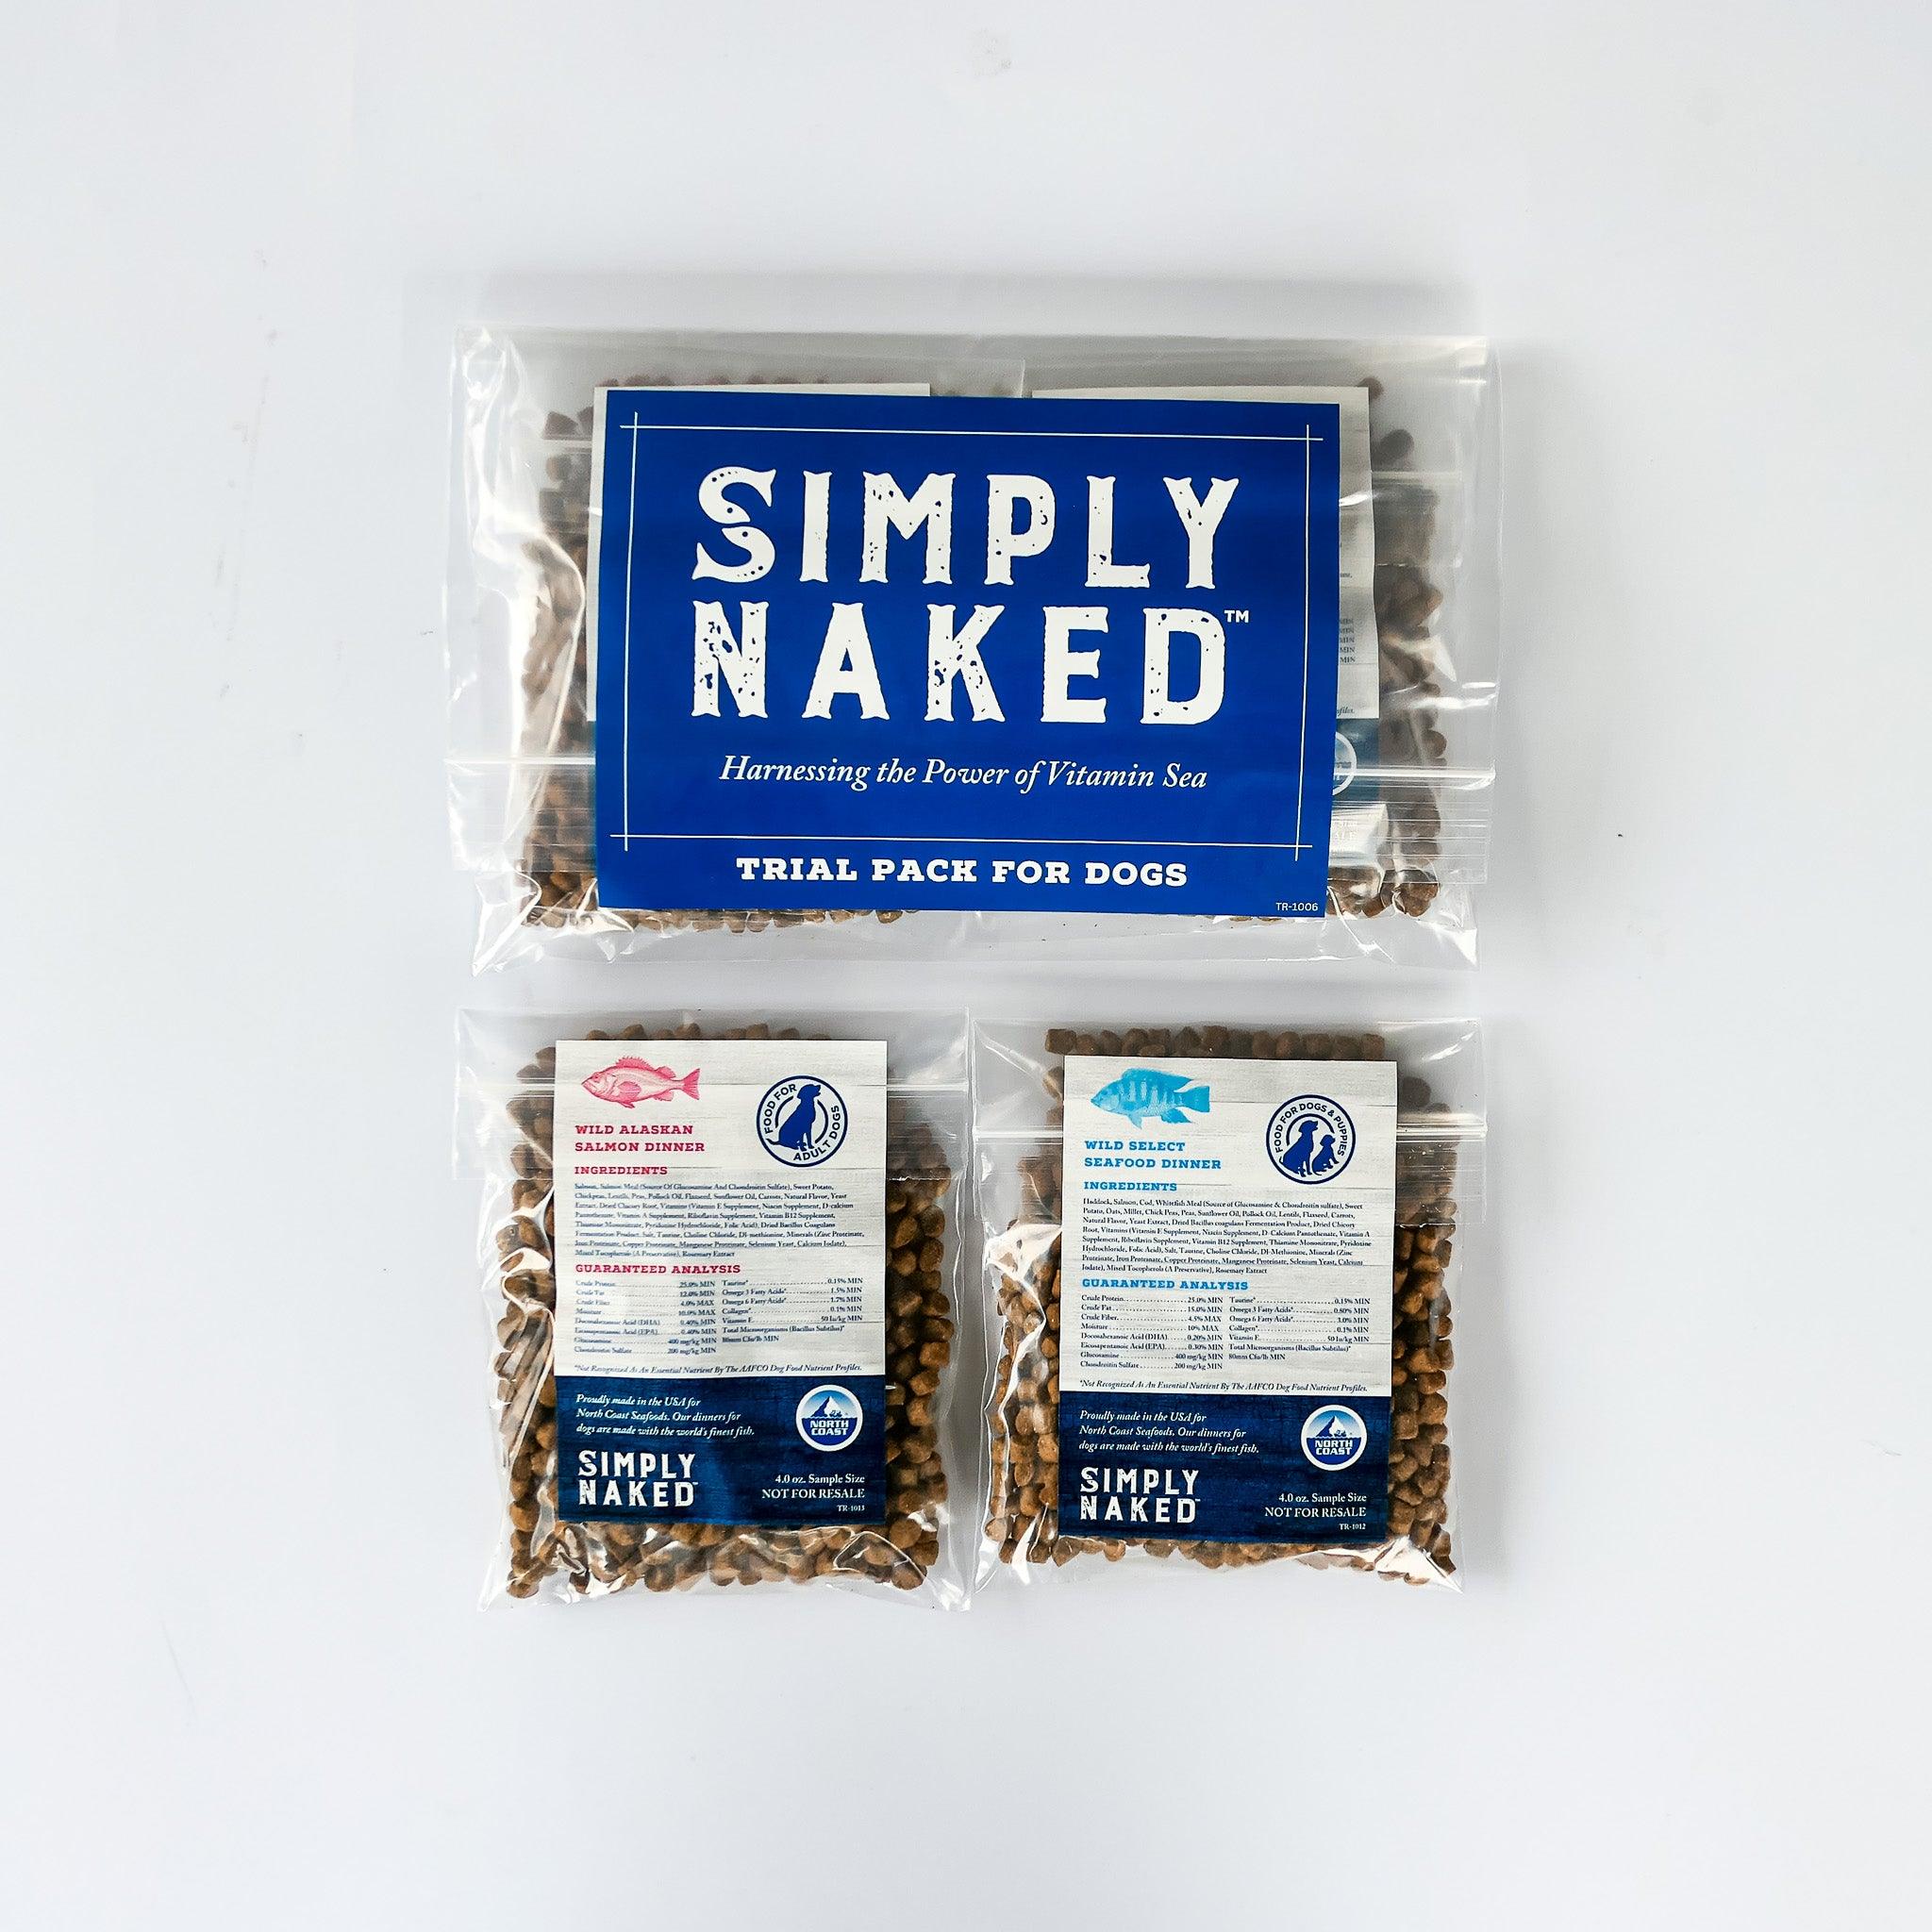 Dog Food Samples by Simply Naked Pet Food